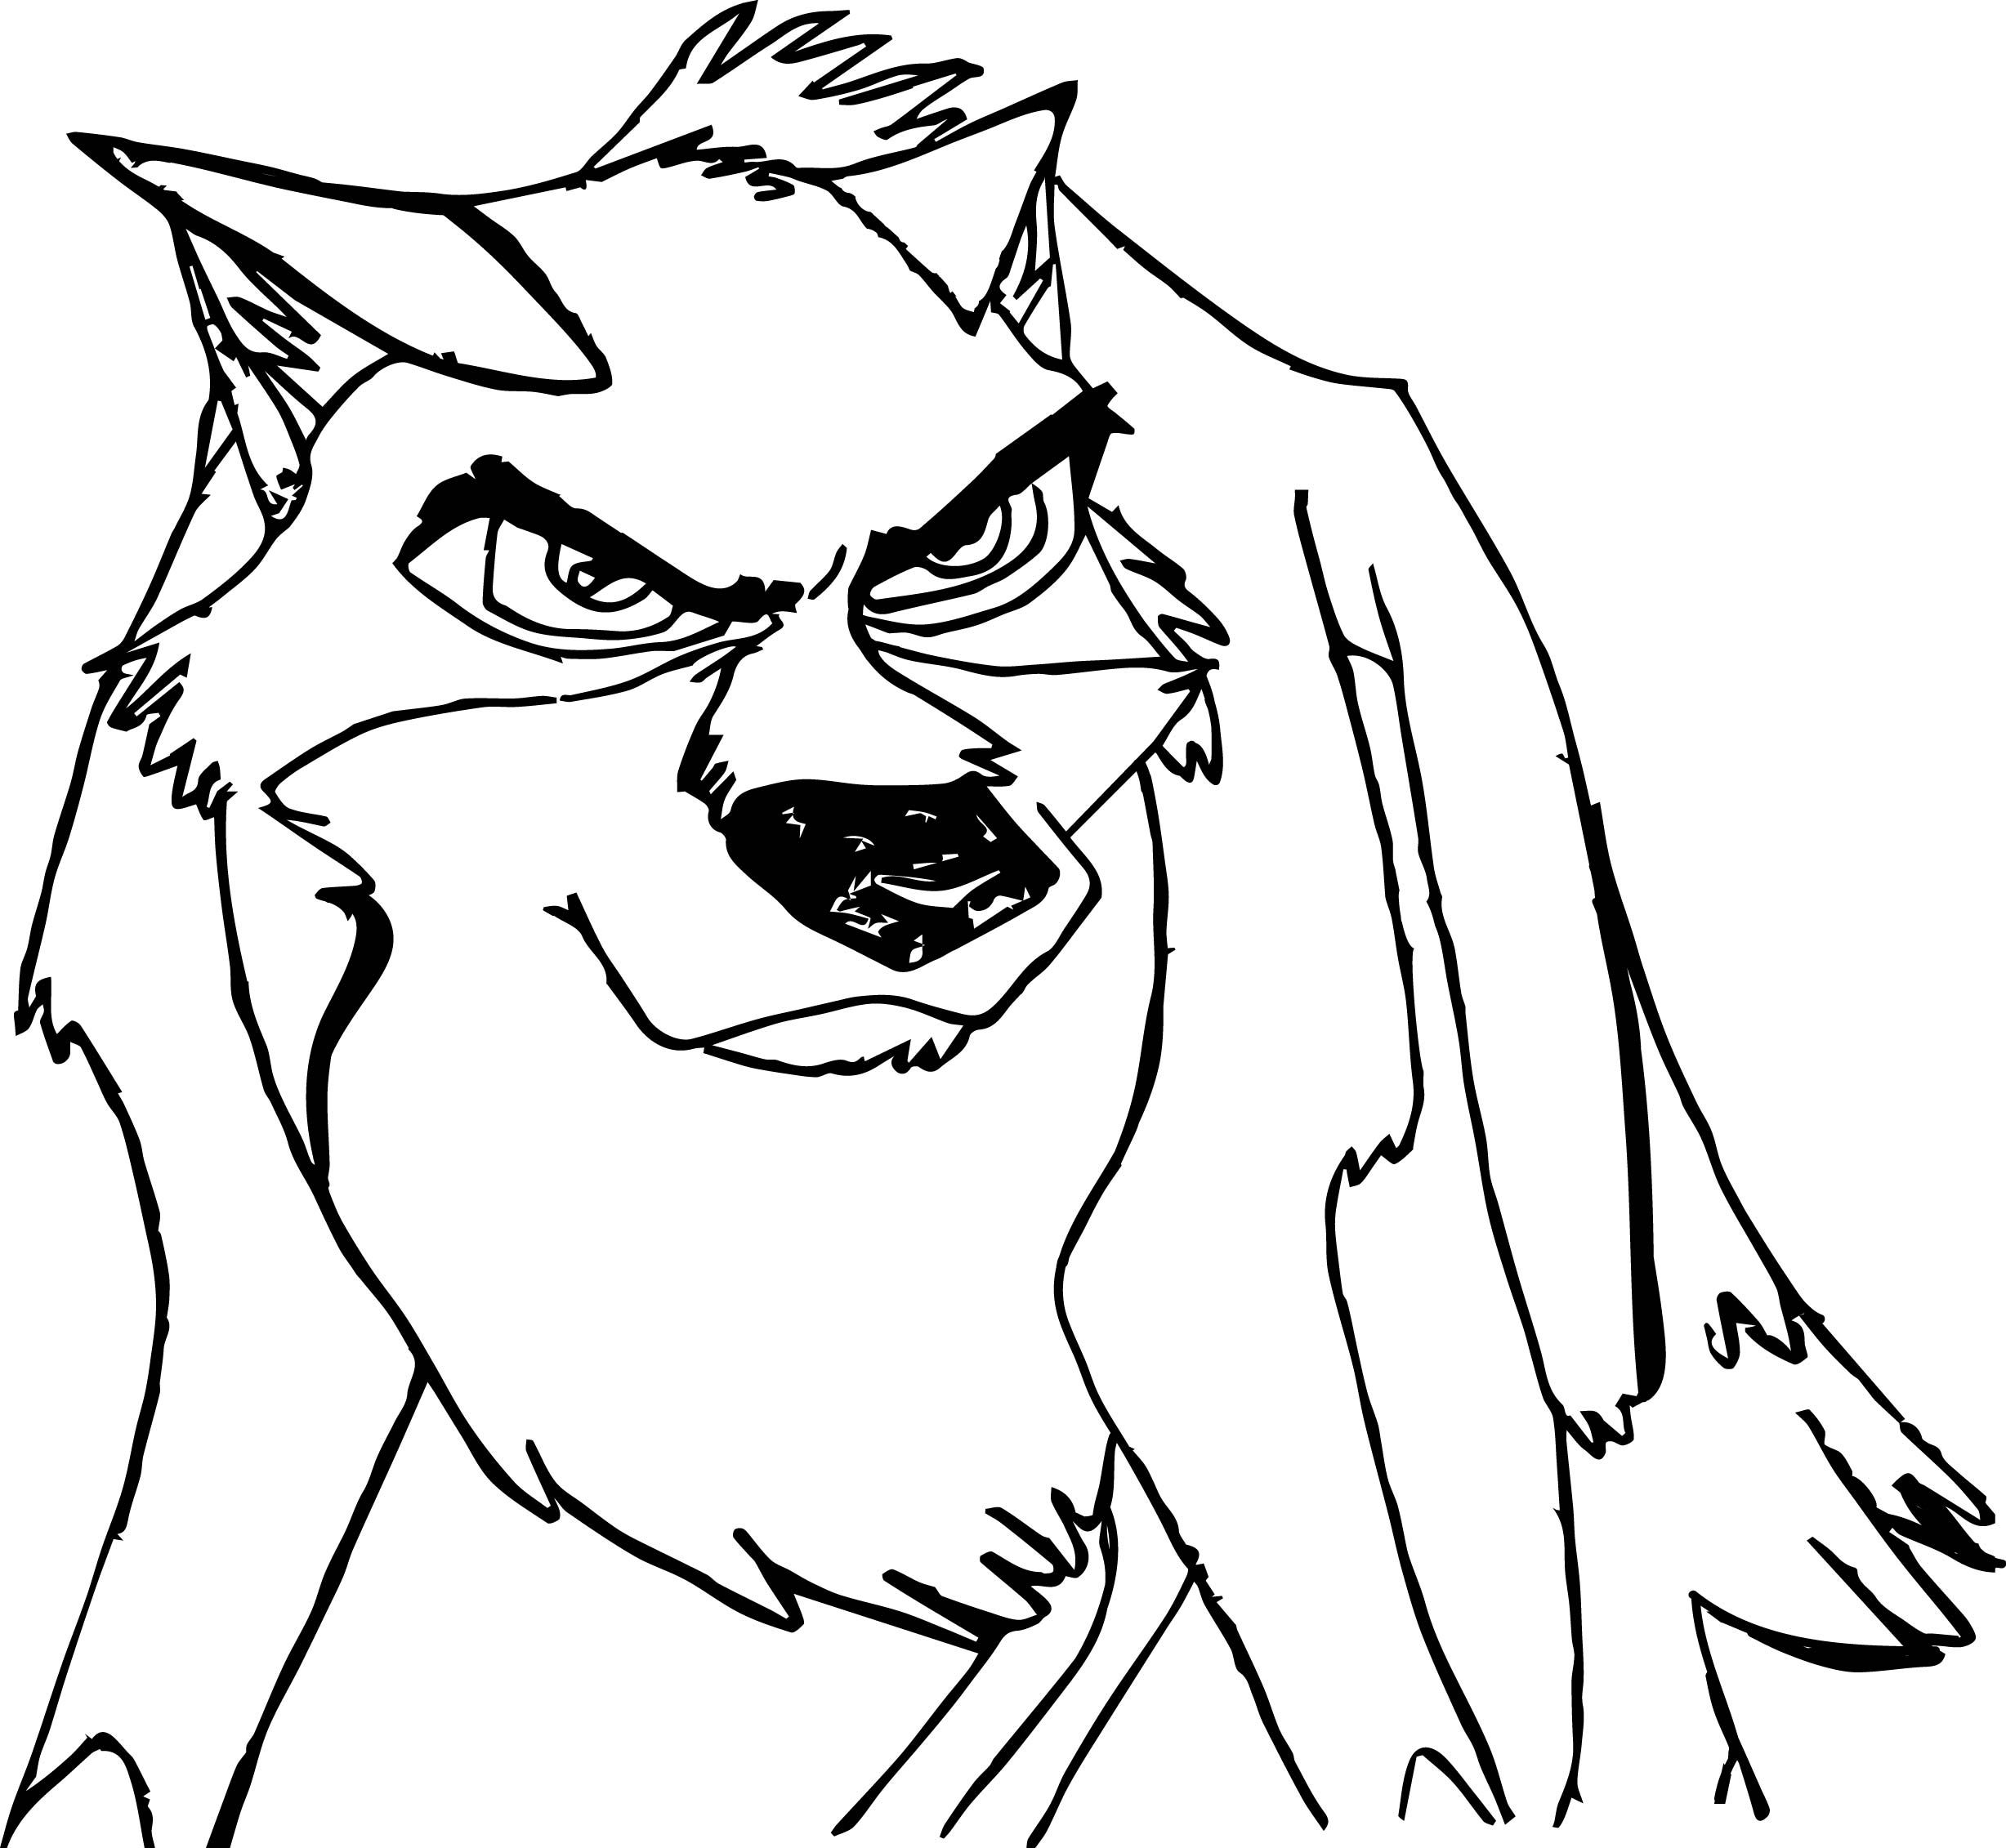 Balto Coloring Pages - Kirkhoytkaseem Coloring Pages